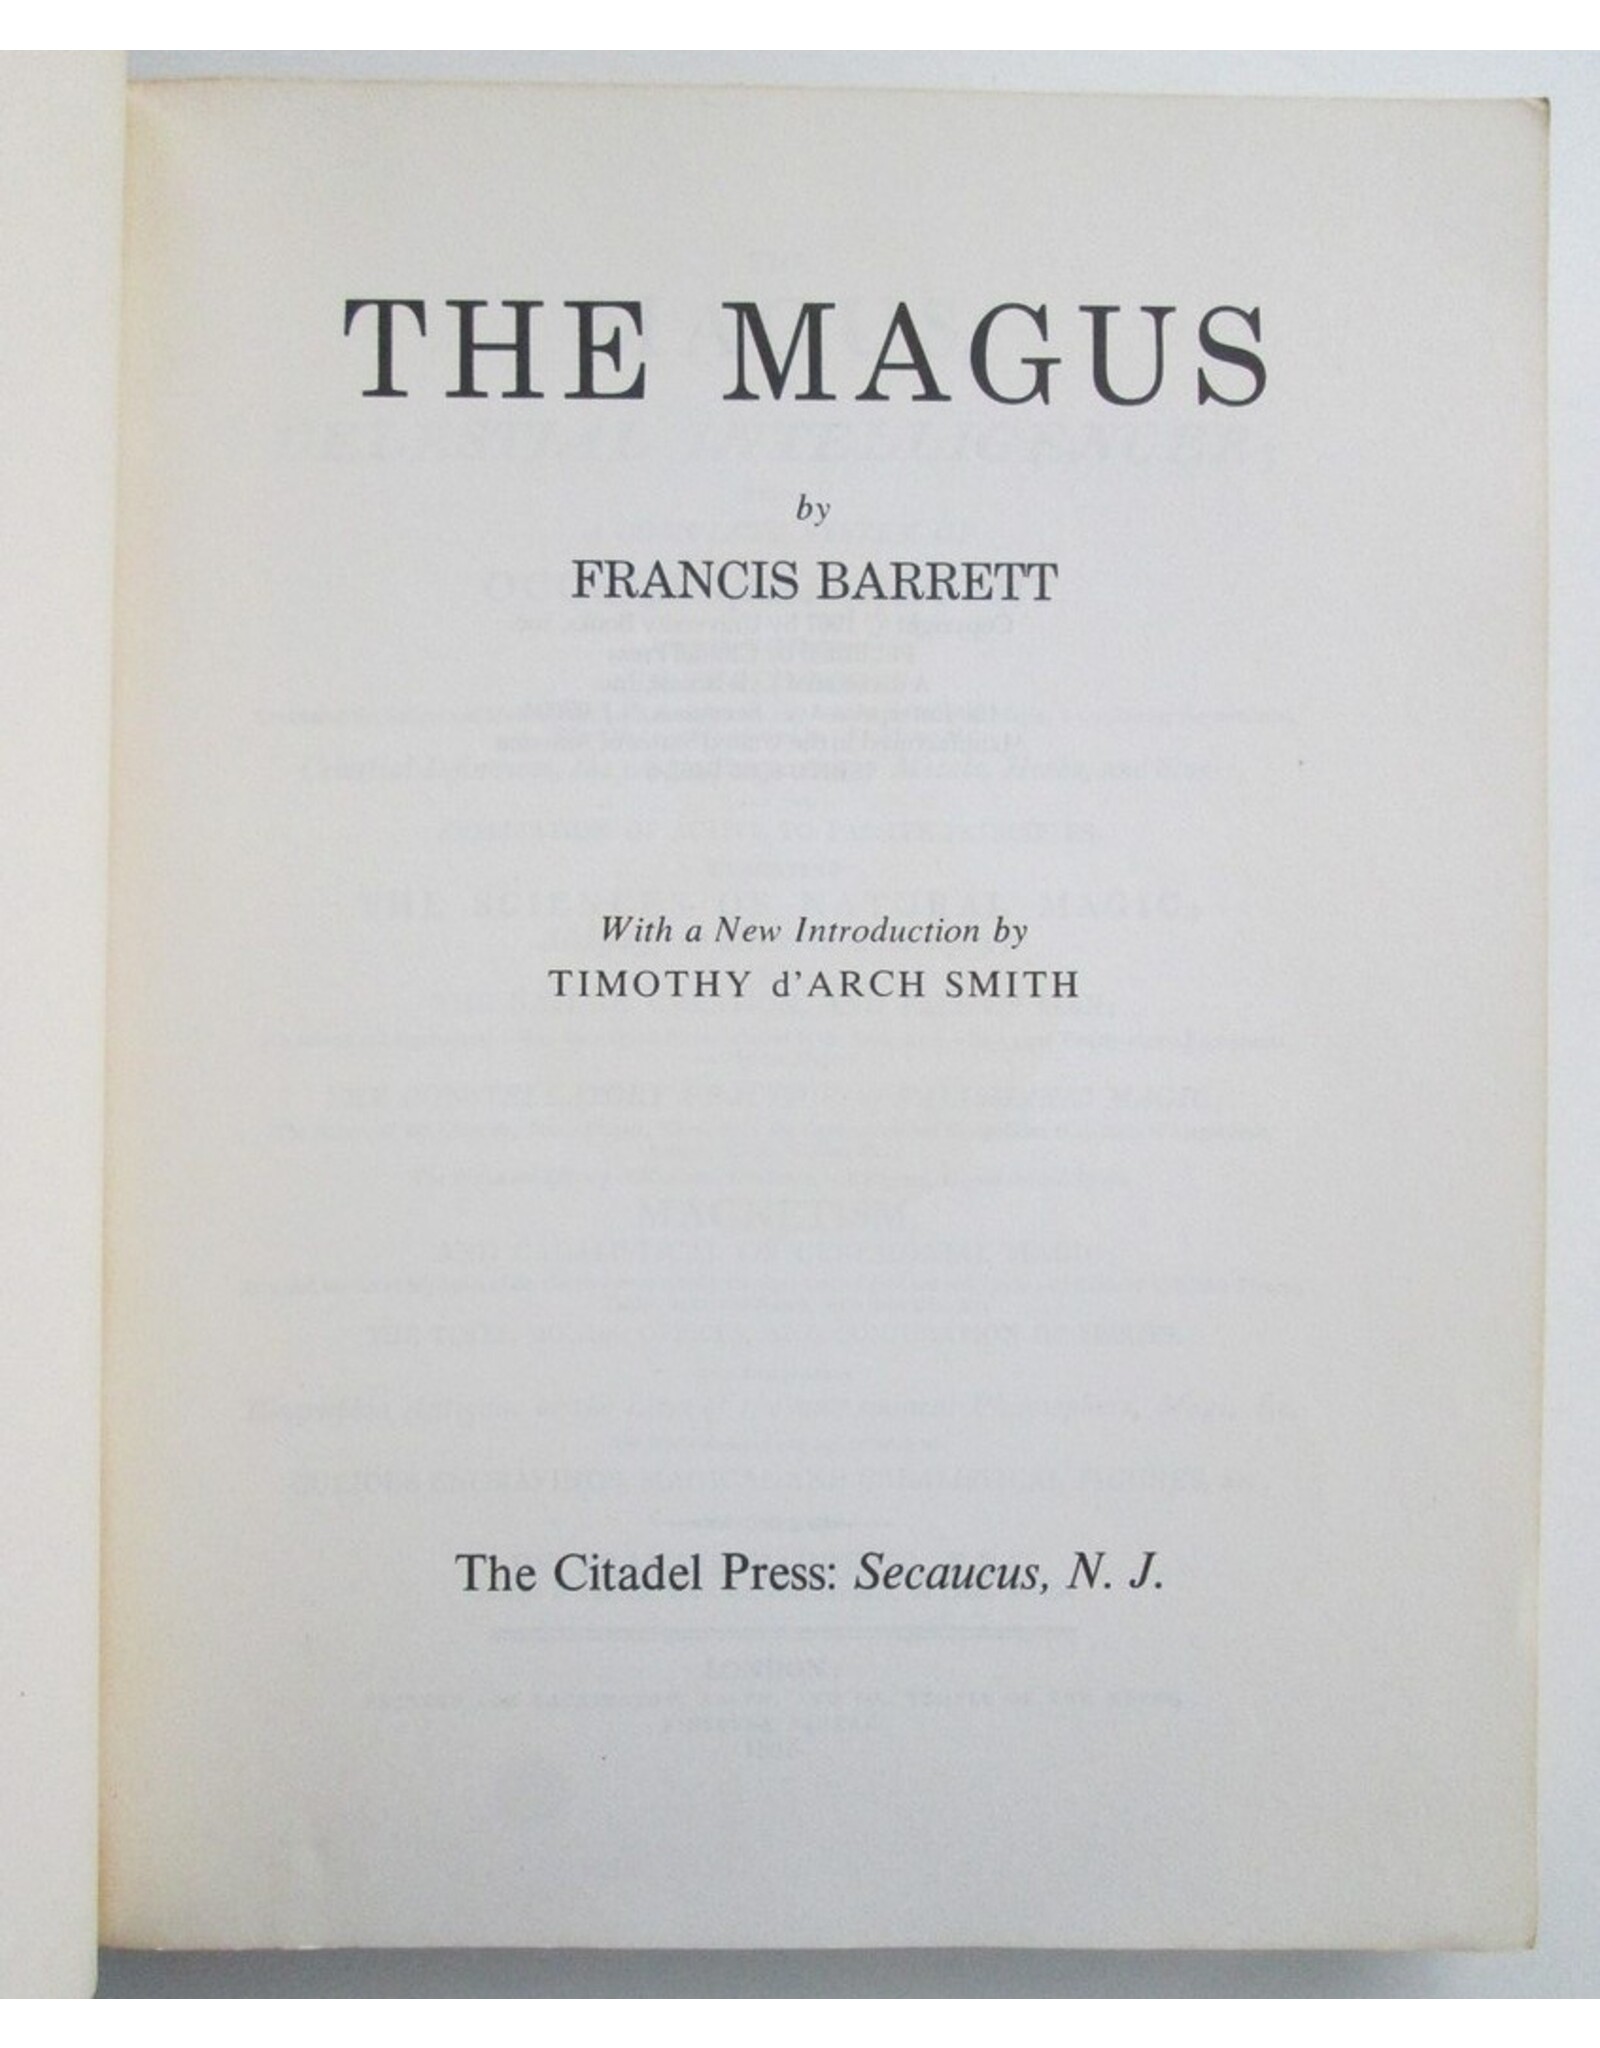 Francis Barrett - The Magus: A Complete System of Occult Philosophy. With a New Introduction by Timothy d'Arch Smith. [Two books bound as one]